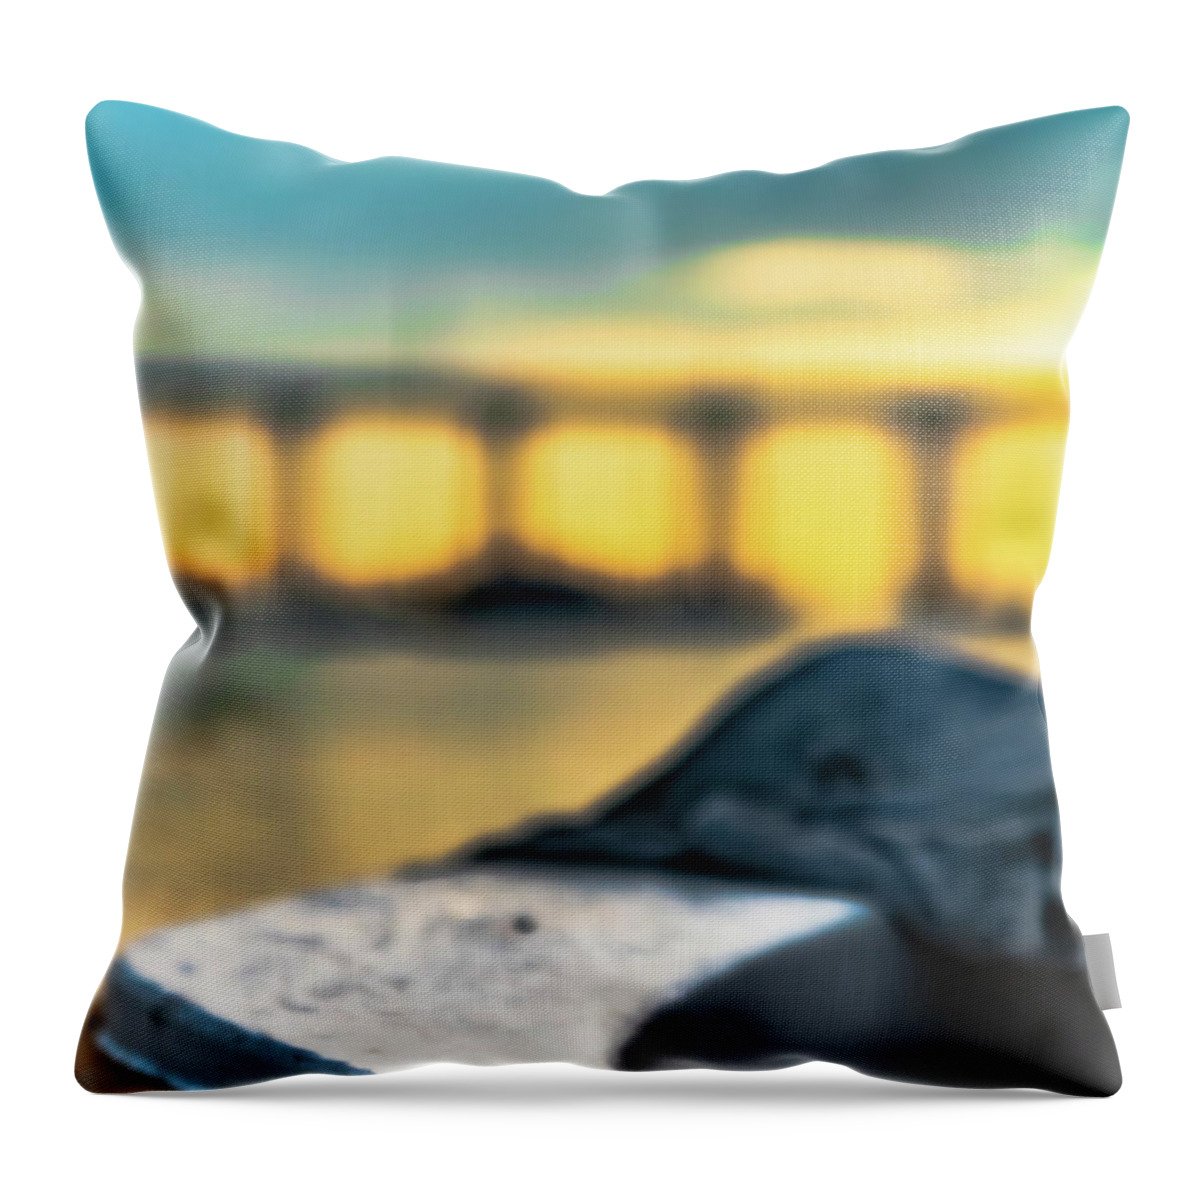 Boat Throw Pillow featuring the photograph Beach Parking by Local Snaps Photography